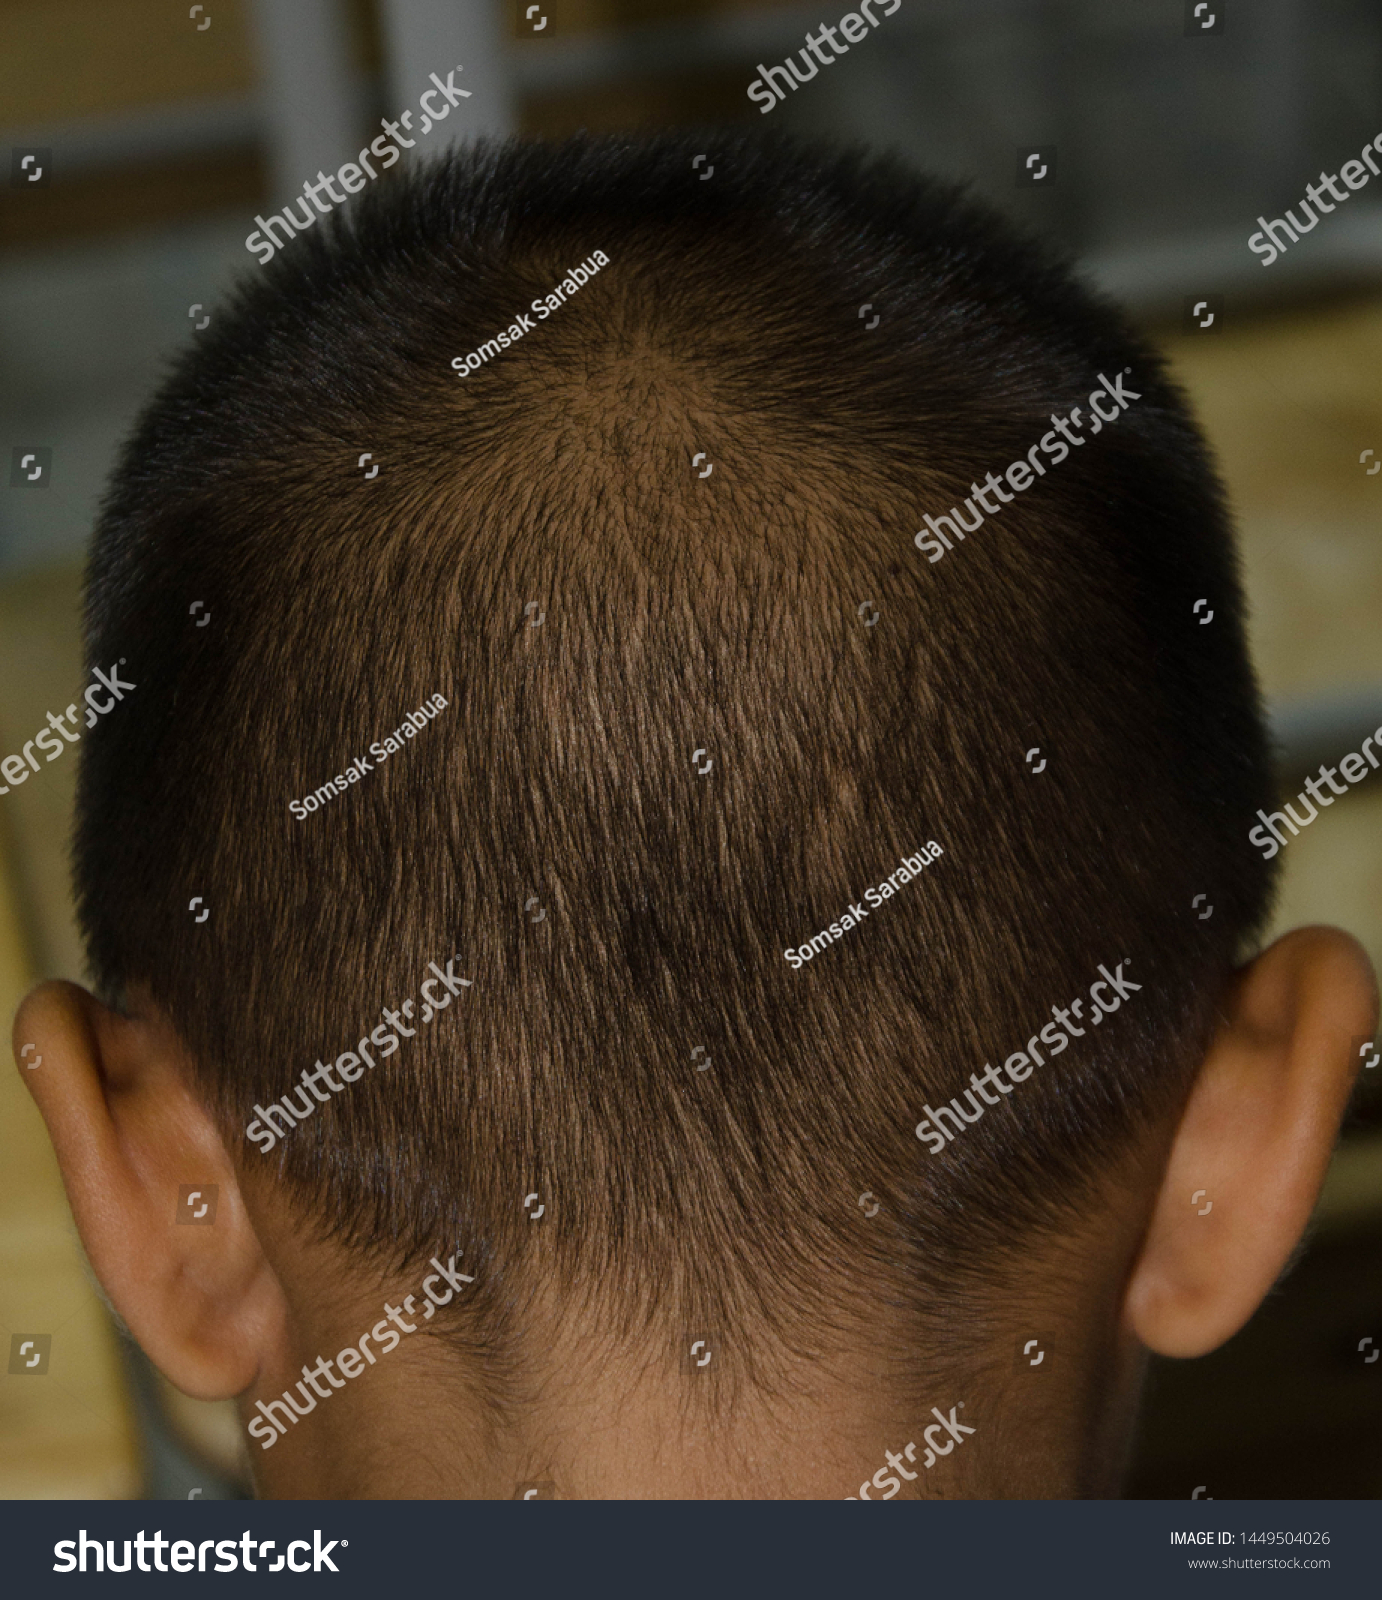 Short hair on the child head, the hair that is circulated is a spiral. #1449504026